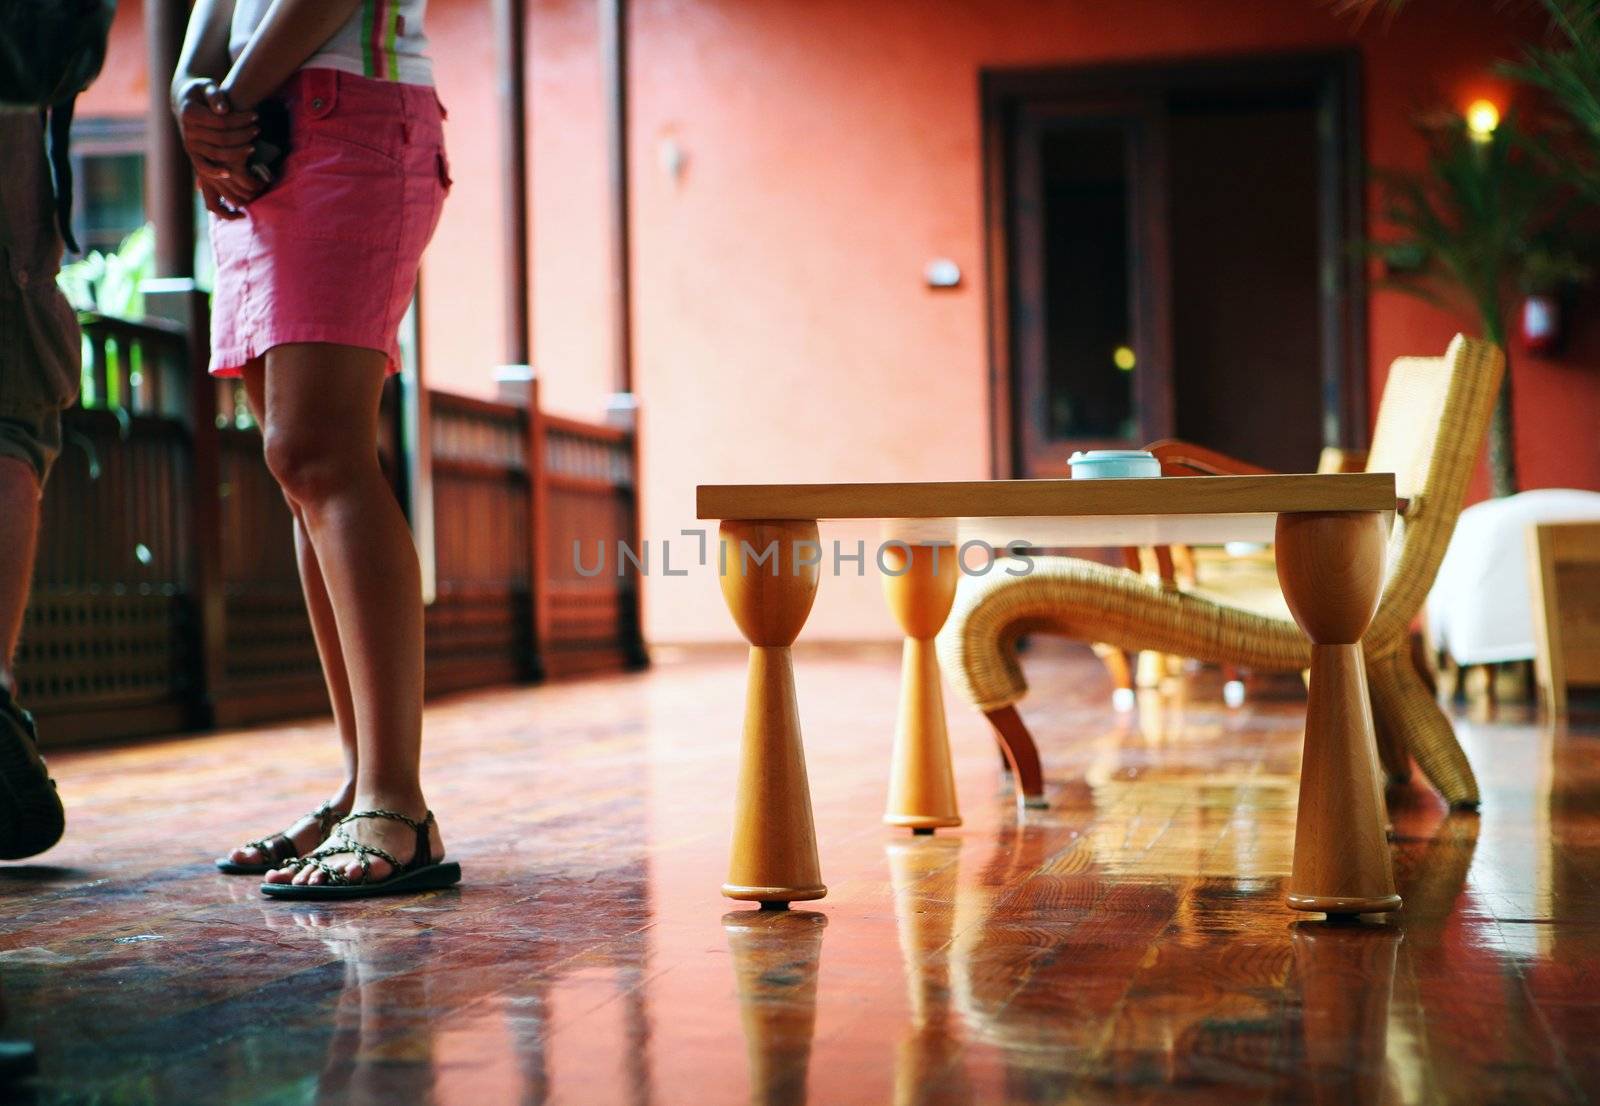 Hotel hall interior with cafe table and woman in pink skirt